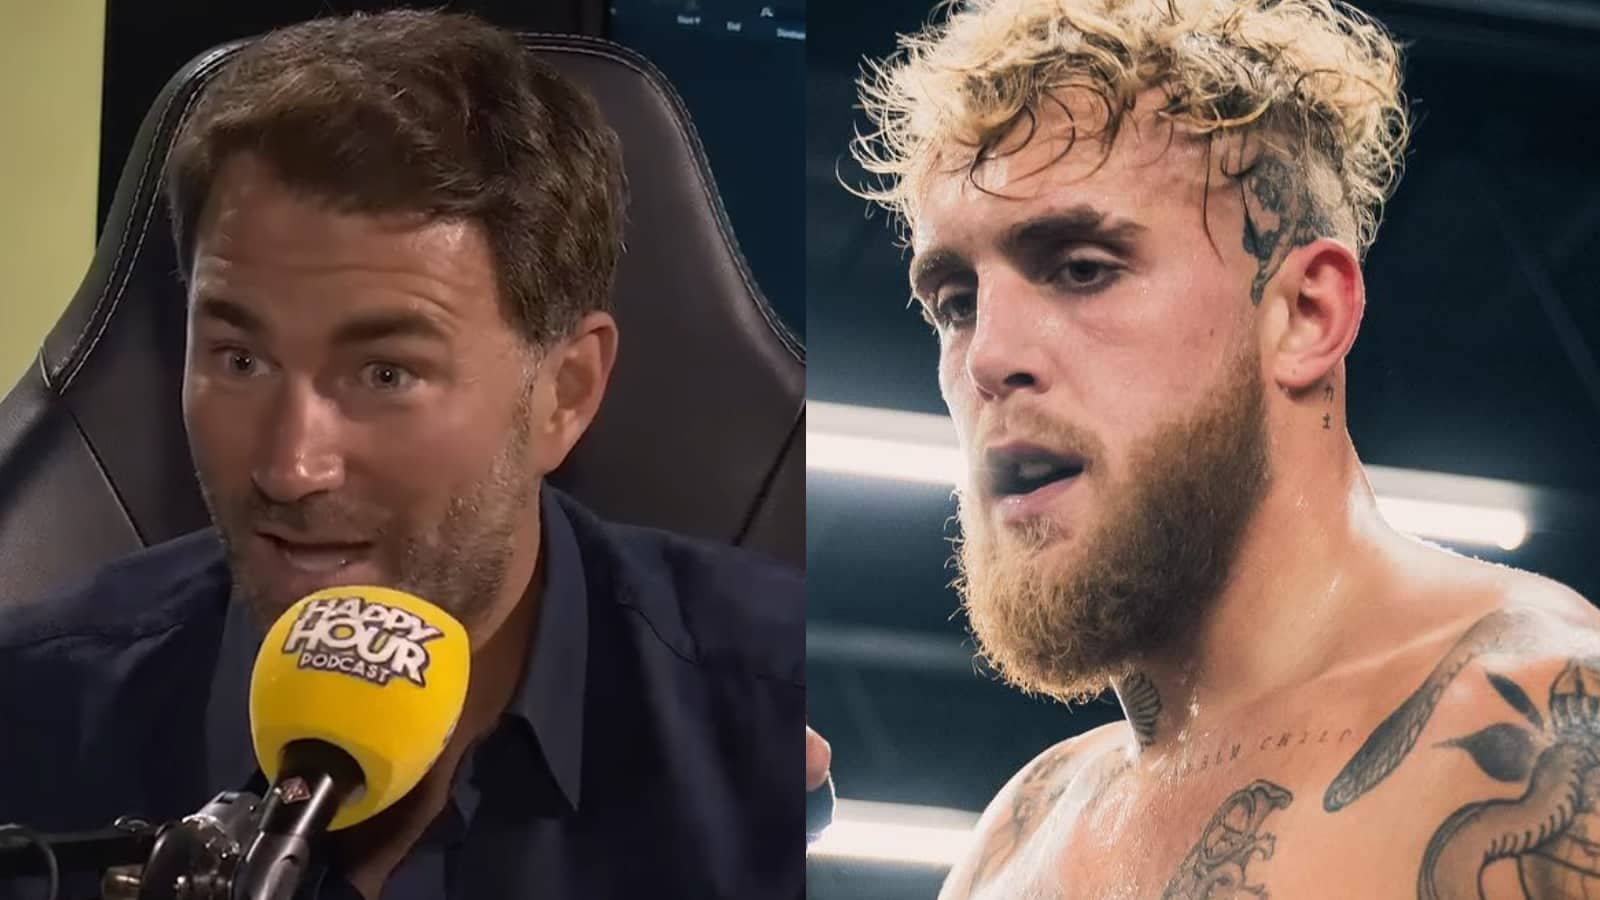 Eddie Hearn speaking on Happy Hour podcast with Jake Paul training